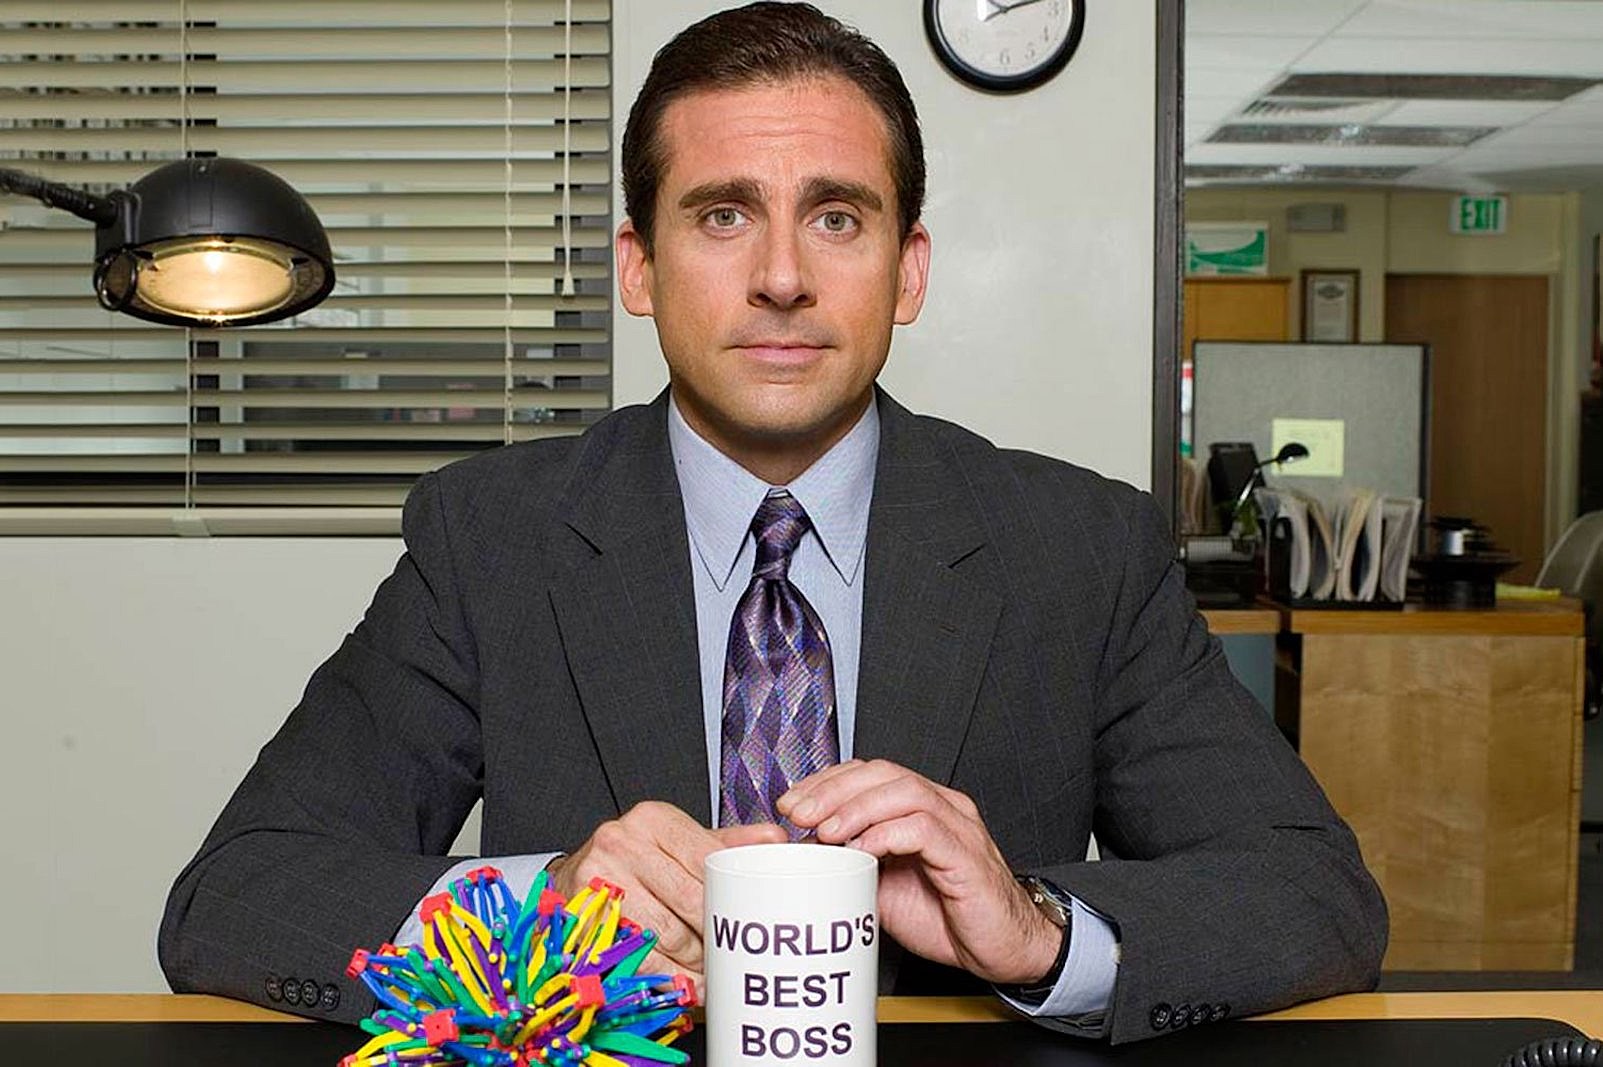 Here's My Top 10 Episodes of 'The Office' [RANKED]